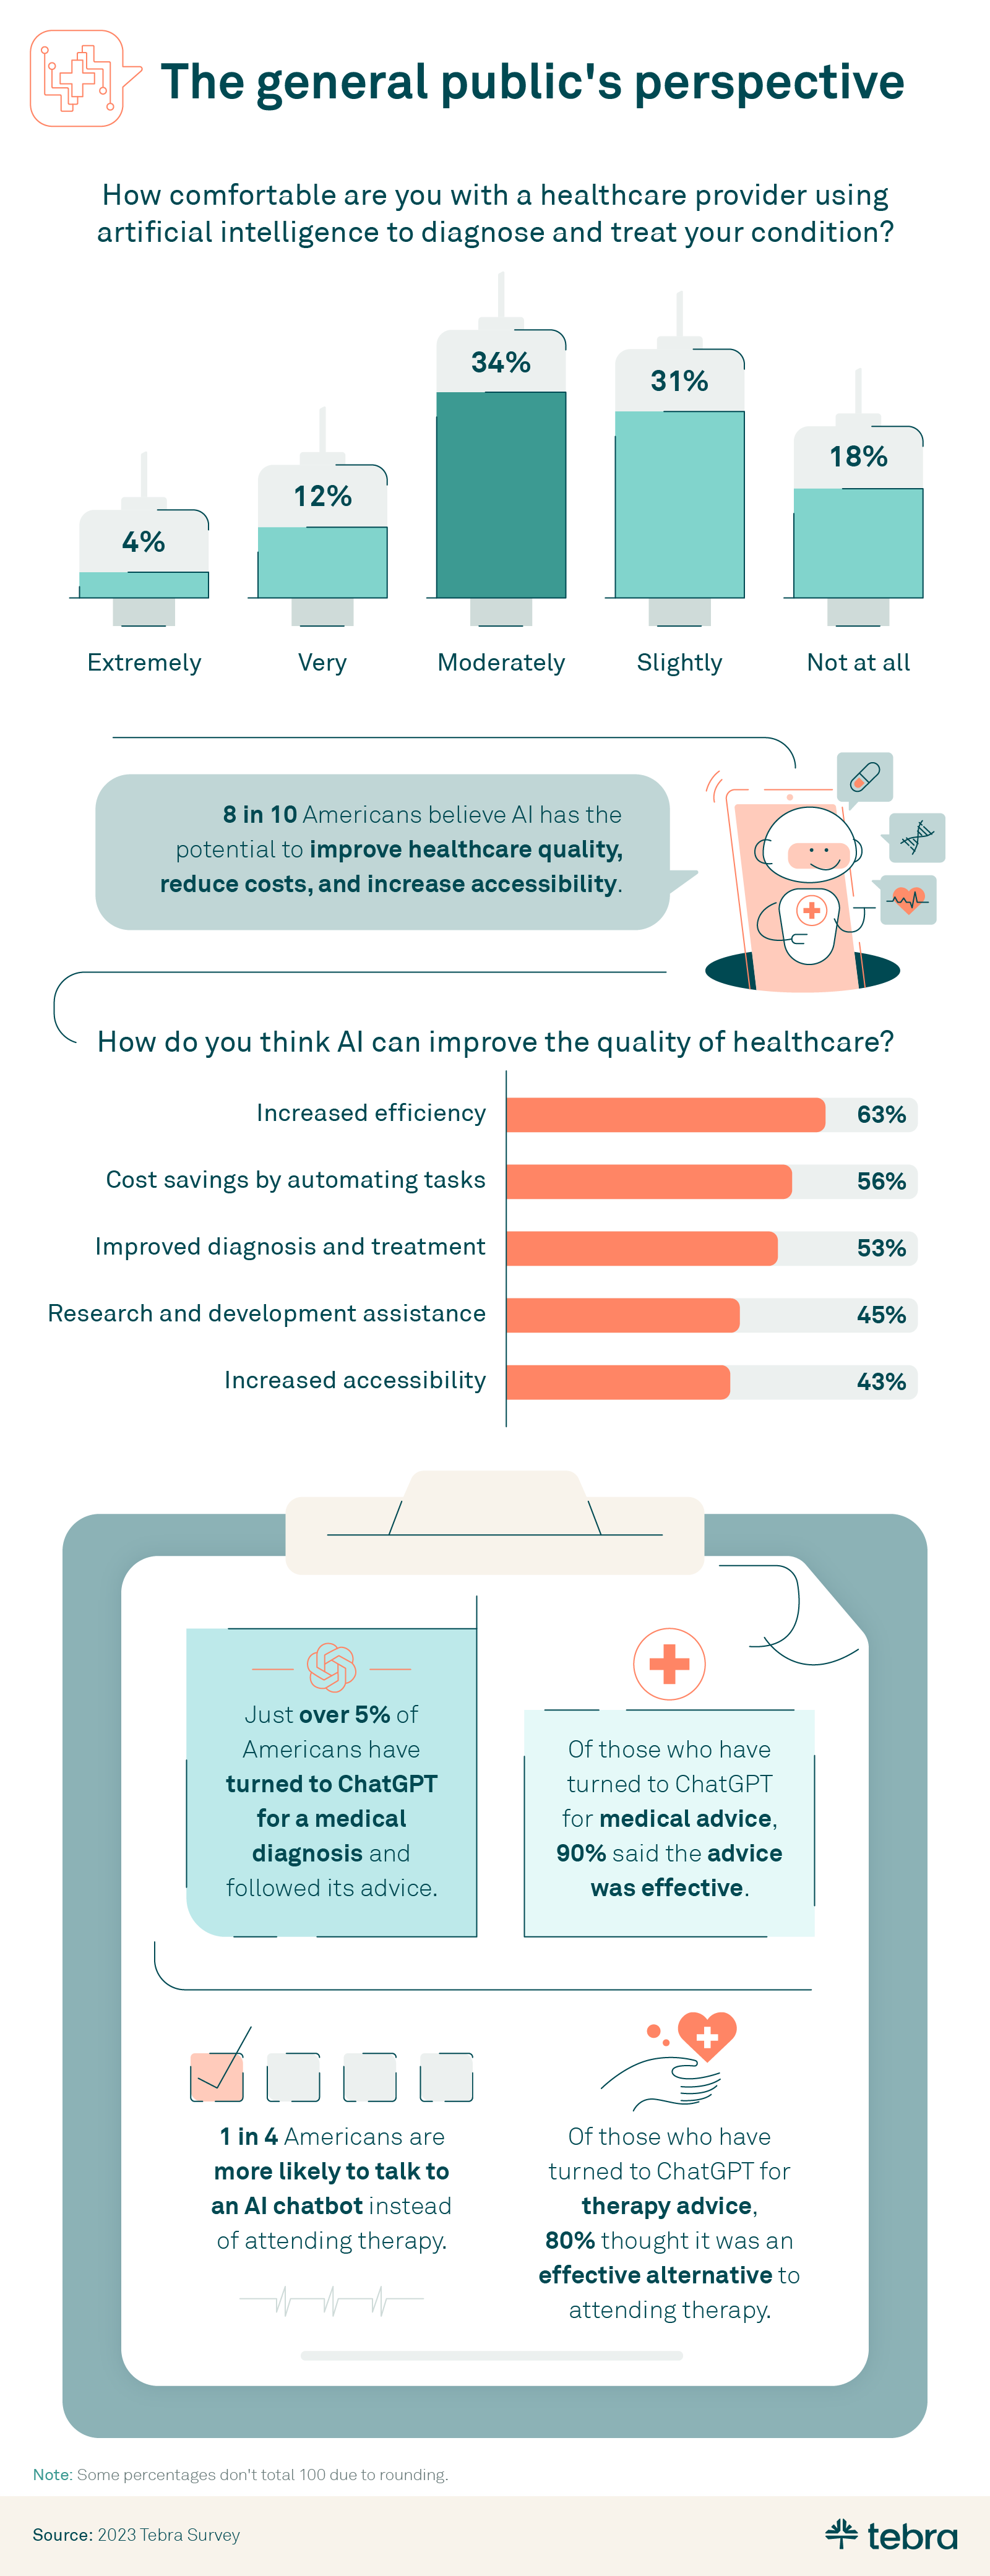 This is an infographic about Tebra research around the topic of AI in healthcare. The infographic is titled "The general public's perspective." 34% of respondents are comfortable with AI diagnosing and treating health conditions accurately. 8 in 10 Americans believe that artificial intelligence has the potential to improve the quality of healthcare, reduce costs, and increase accessibility. Just over 5% of Americans have used ChatGPT for a medical diagnosis and followed its advice. Of those who have already turned to ChatGPT for medical advice, 90% felt it was effective. One-quarter of Americans said they’d prefer talking to an AI chatbot over a human therapist. Of those who have already turned to ChatGPT for therapy advice, 80% felt it was an effective alternative to attending therapy. 